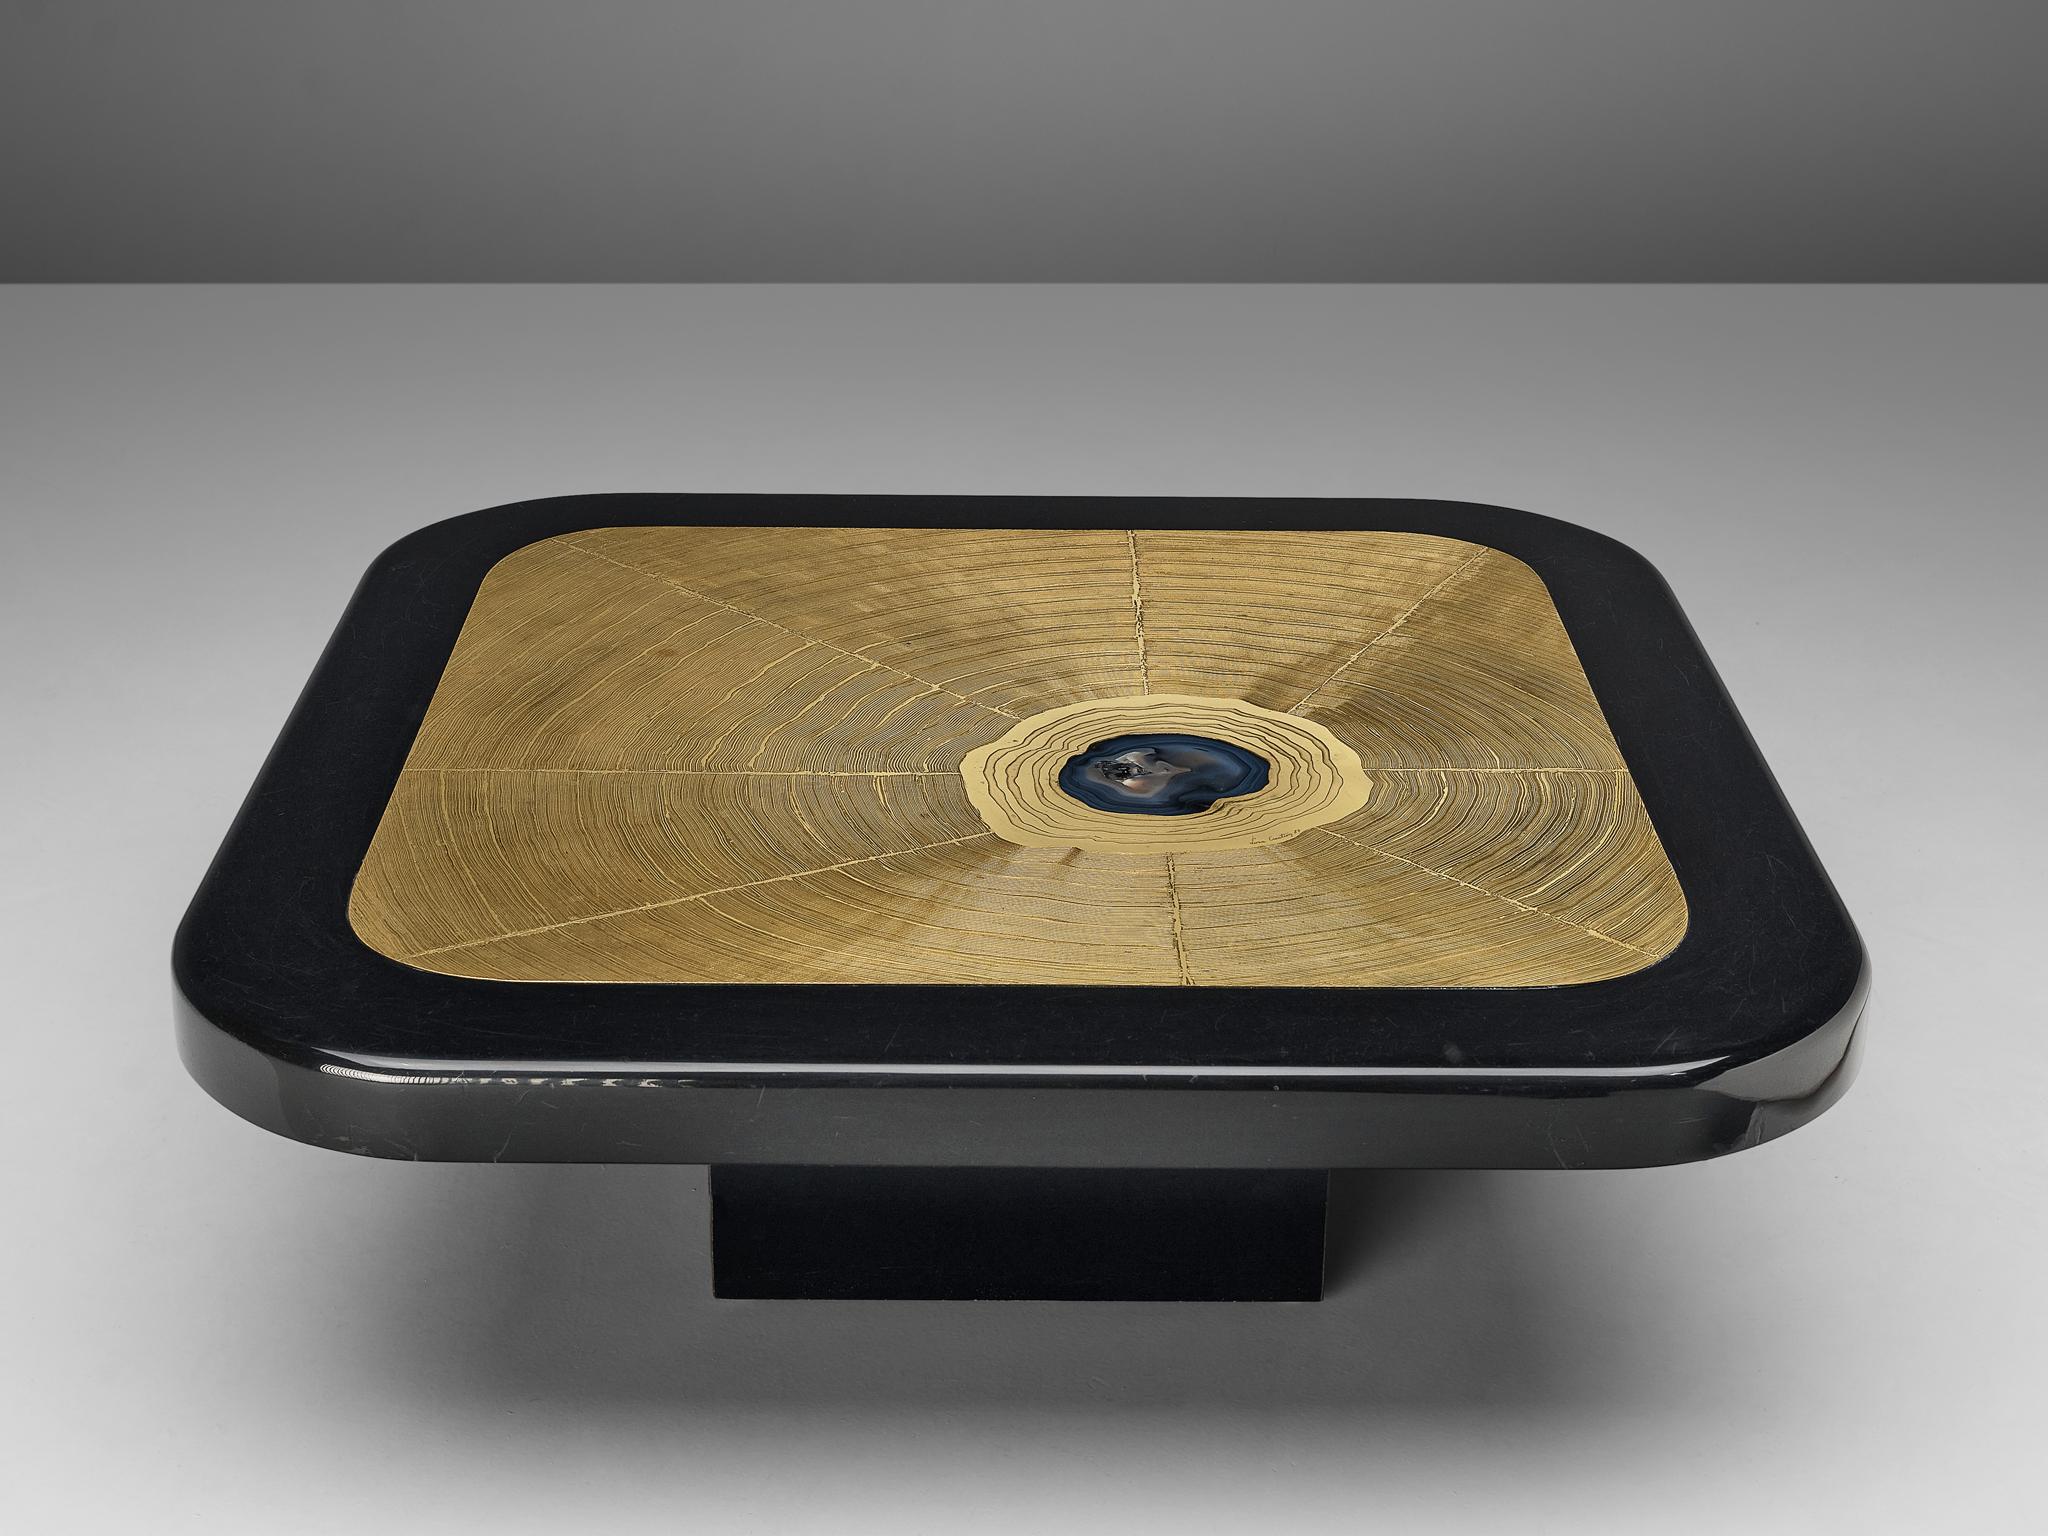 Lova Creation coffee table, brass, metal, wood, agate, Belgium, 1987

This luxurious side table by Lova Creation is a dazzling eyecatcher. The golden square tabletop is signed and shows a pattern of large abstract brush strokes. The center is